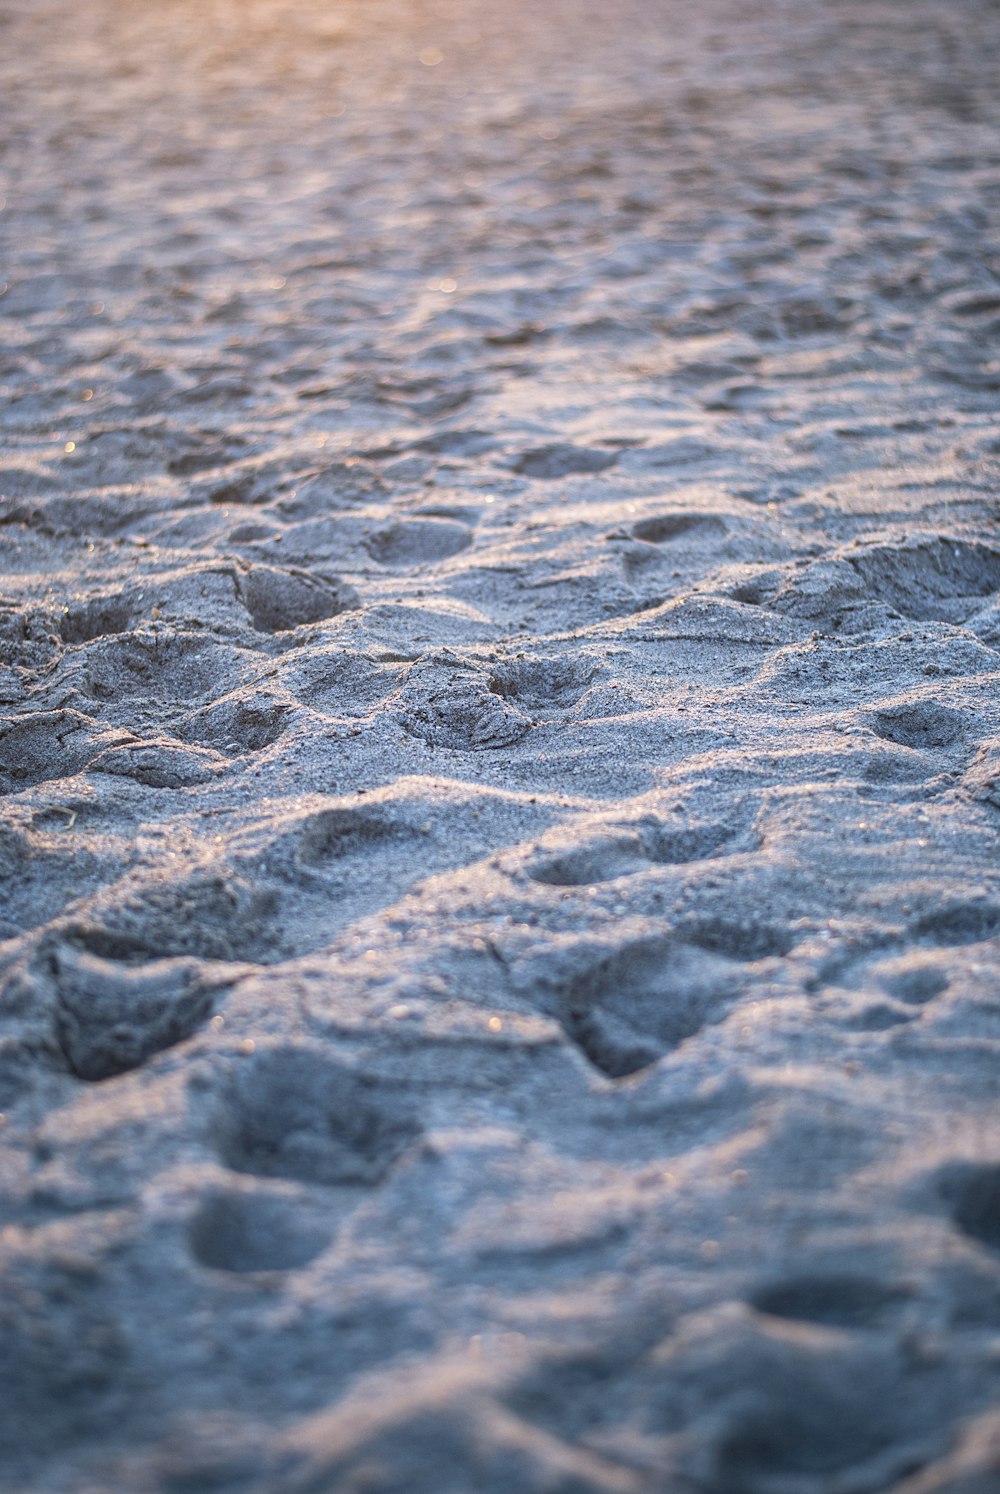 a close up of a beach with footprints in the sand